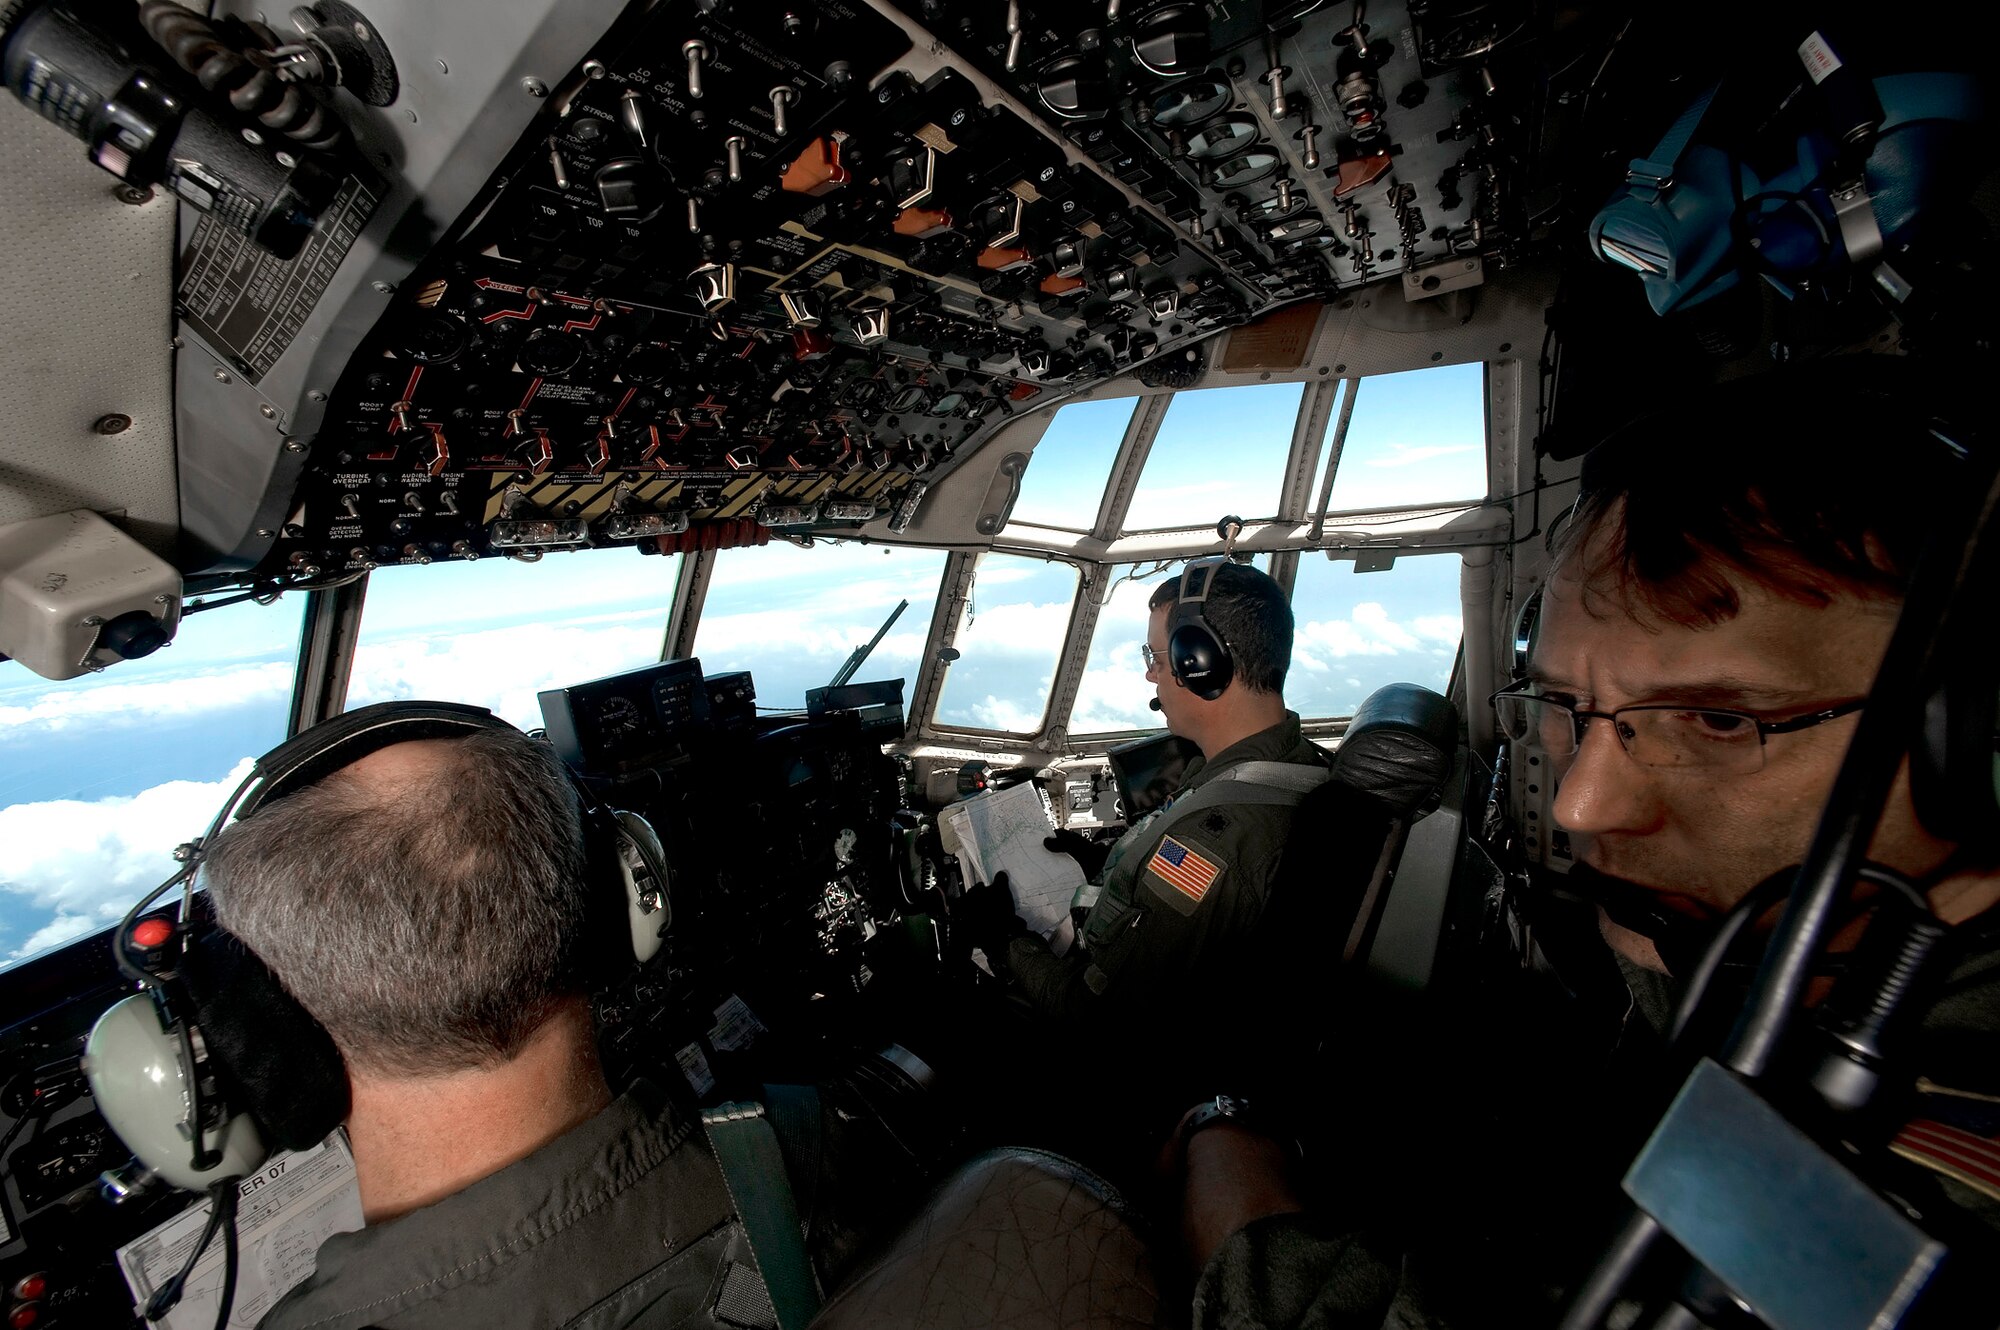 Master Sgt. Archie Archambault looks for oil while flying in a C-130 Hercules over the Gulf of Mexico May 7, 2010. Sergeant Archambault is a flight engineer from the Air Force Reserve Command's 910th Airlift Wing at Youngstown-Warren Air Reserve Station, Ohio.  (U.S. Air Force photo/Tech. Sgt. Adrian Cadiz)
